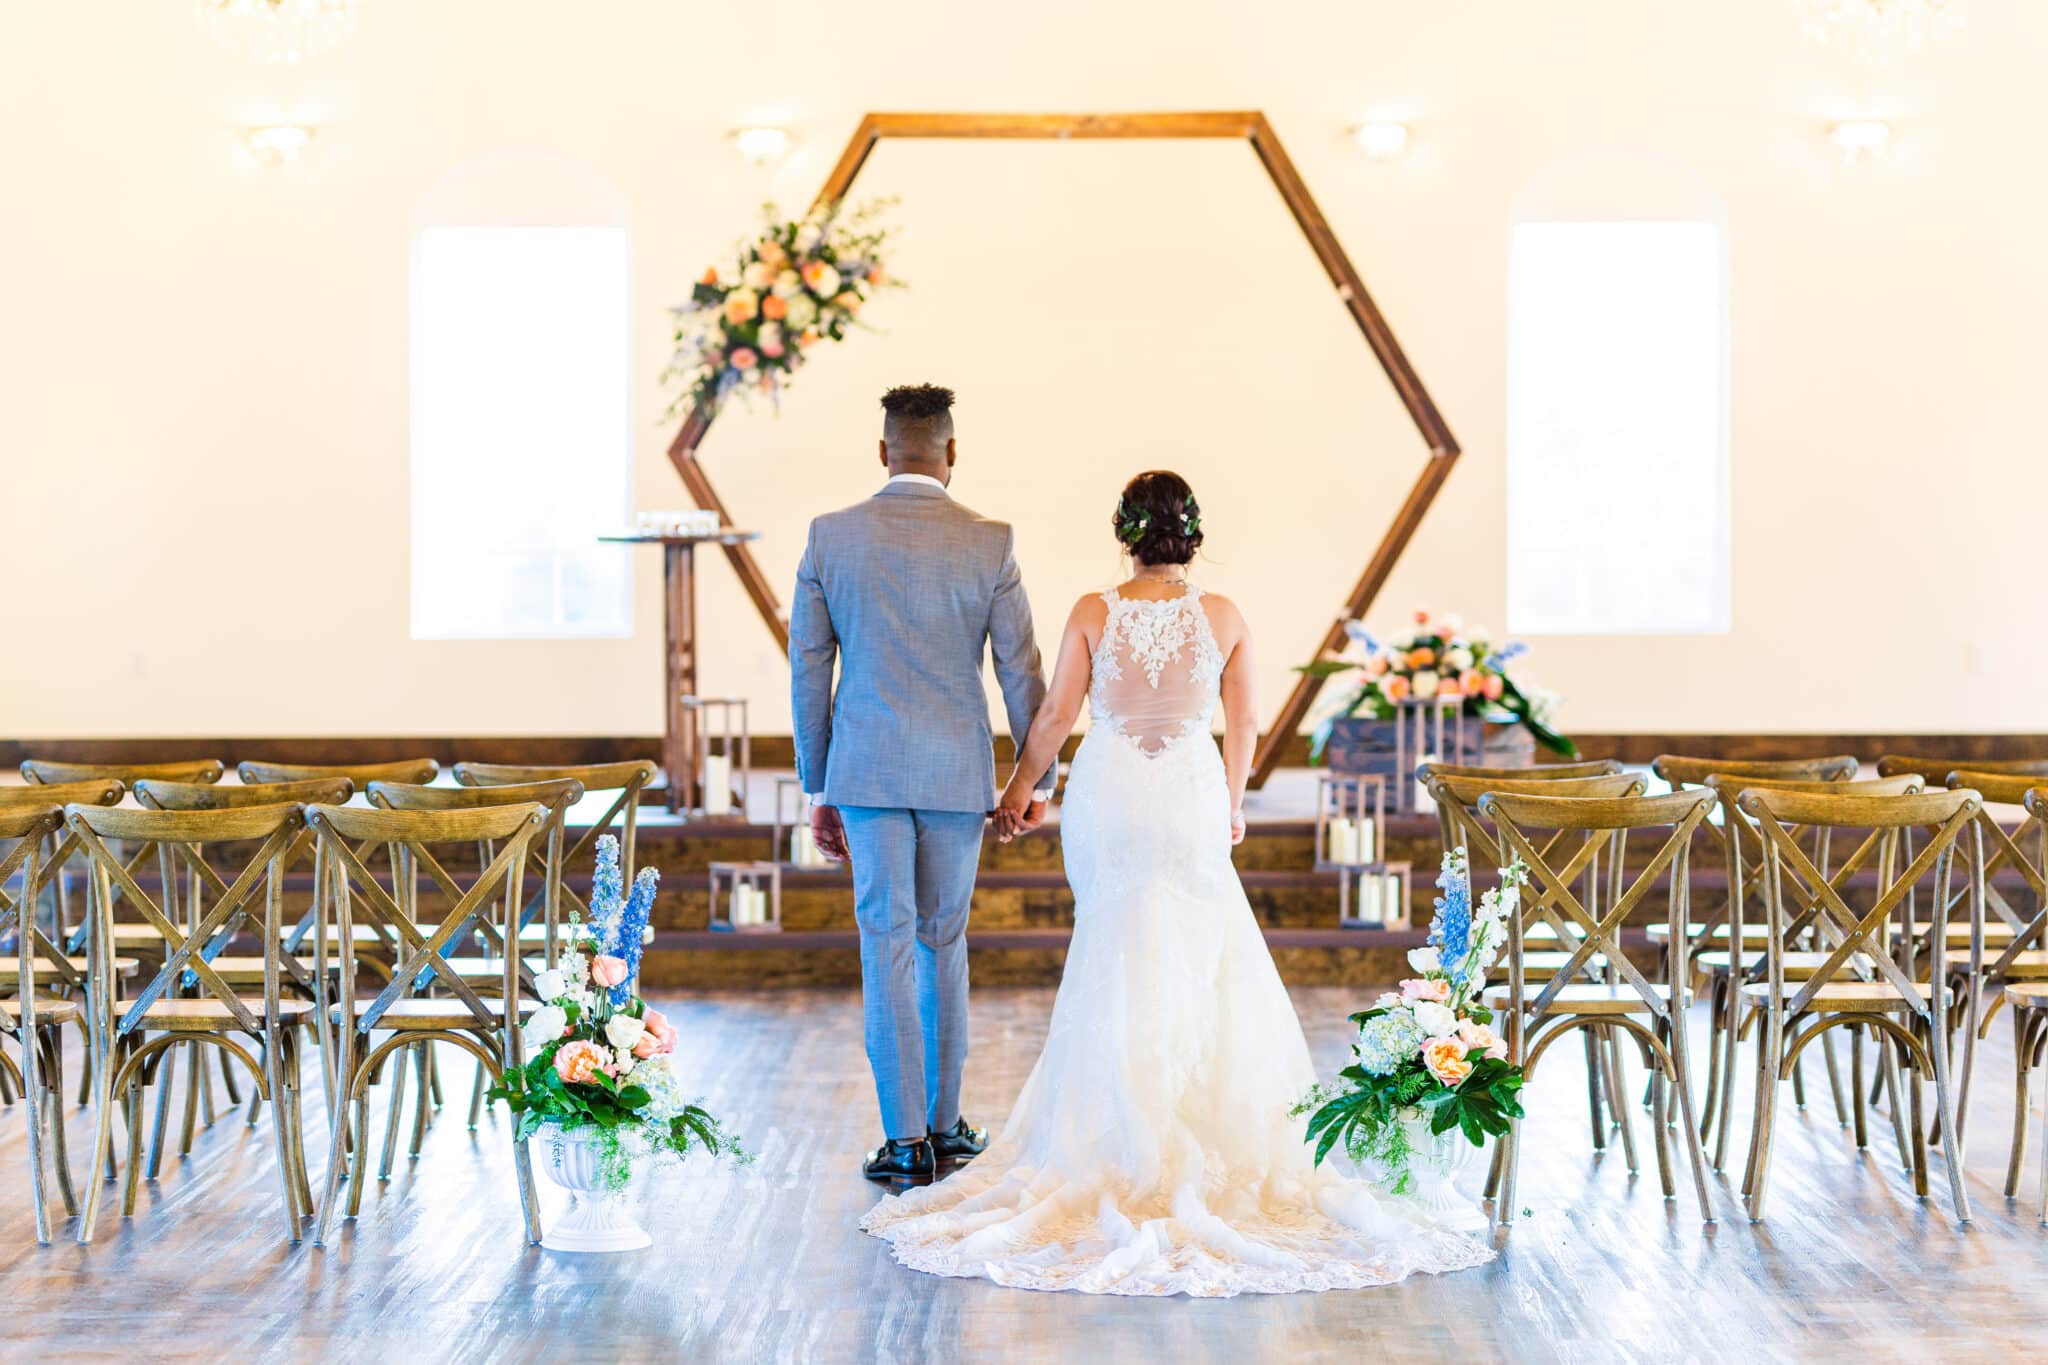 couple walking down aisle of ceremony space in suit and wedding dress